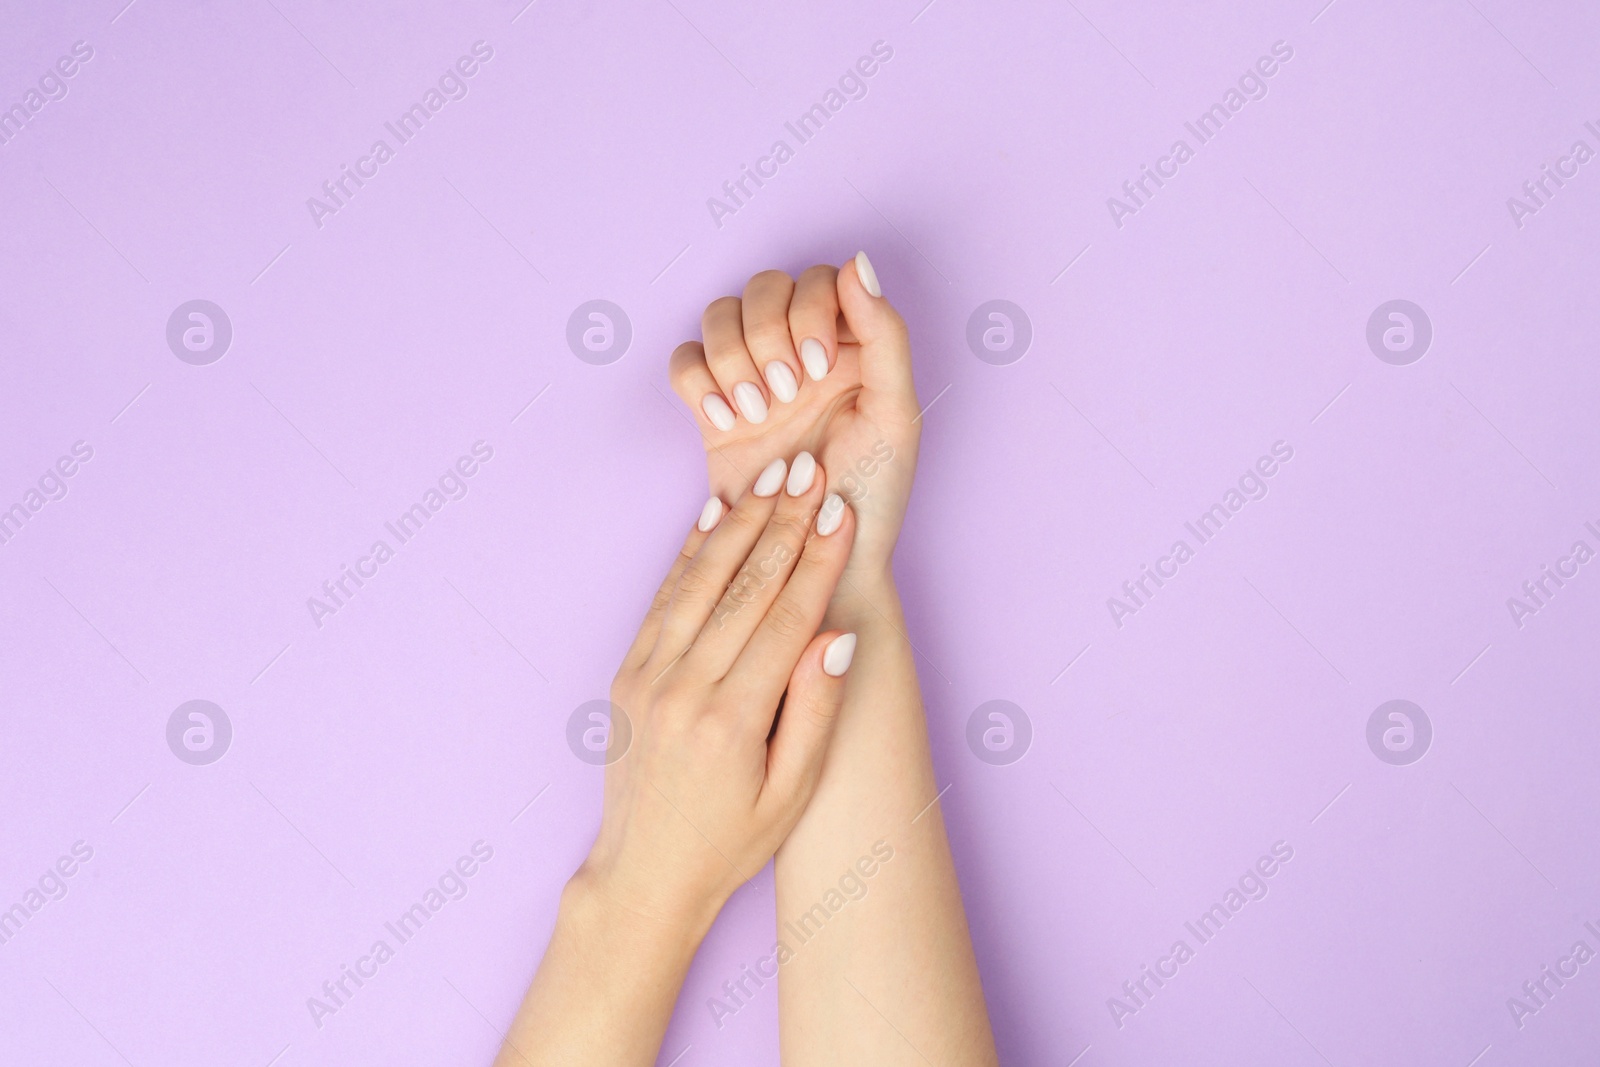 Photo of Woman with white polish on nails against violet background, top view